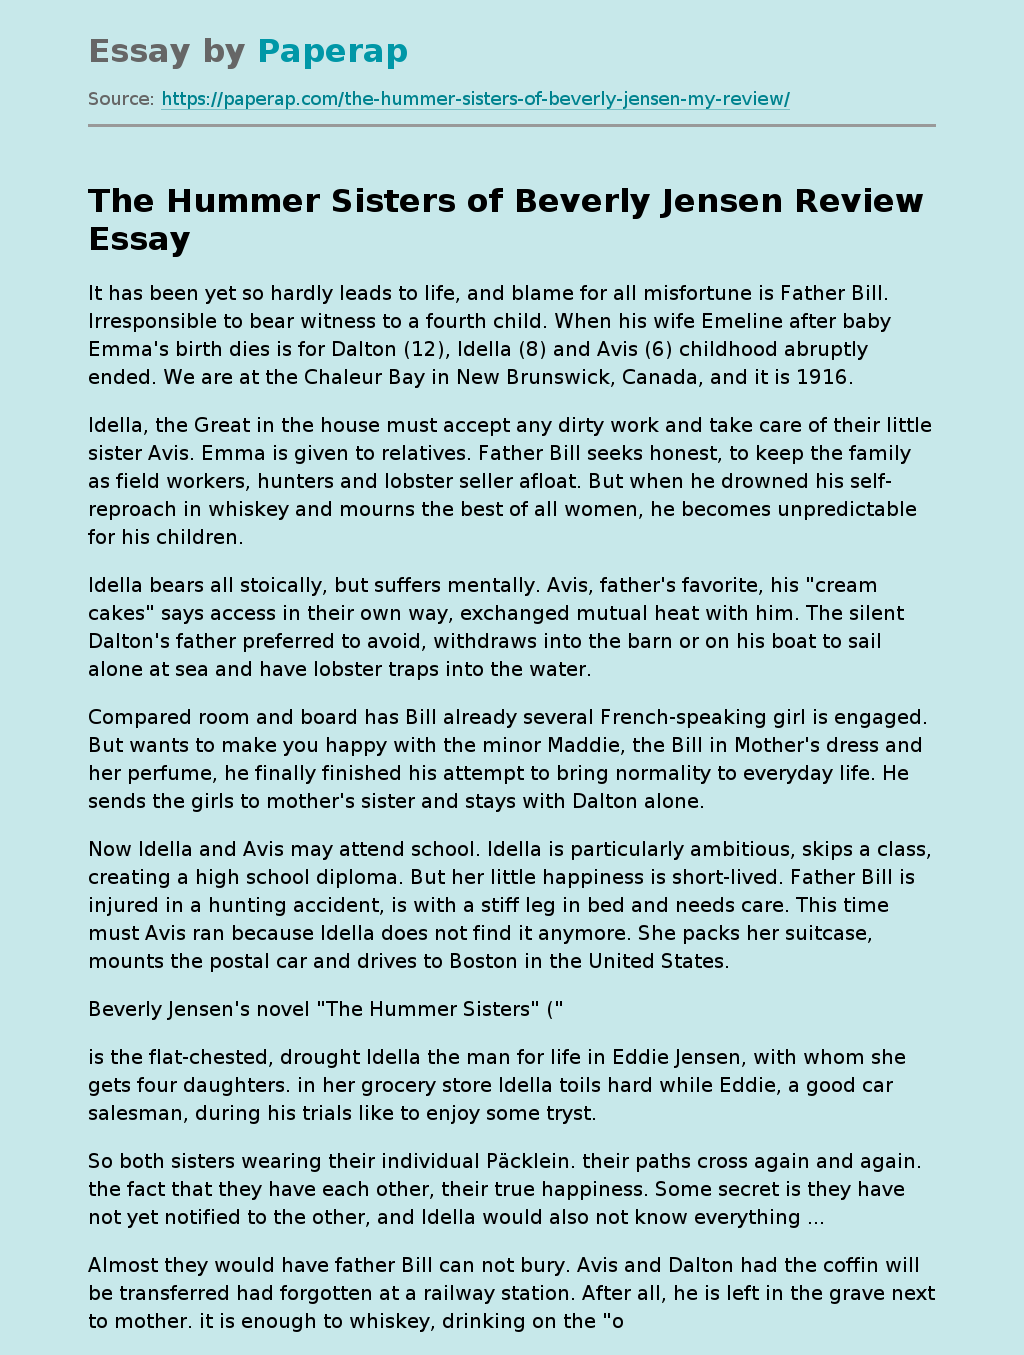 The Hummer Sisters of Beverly Jensen Review